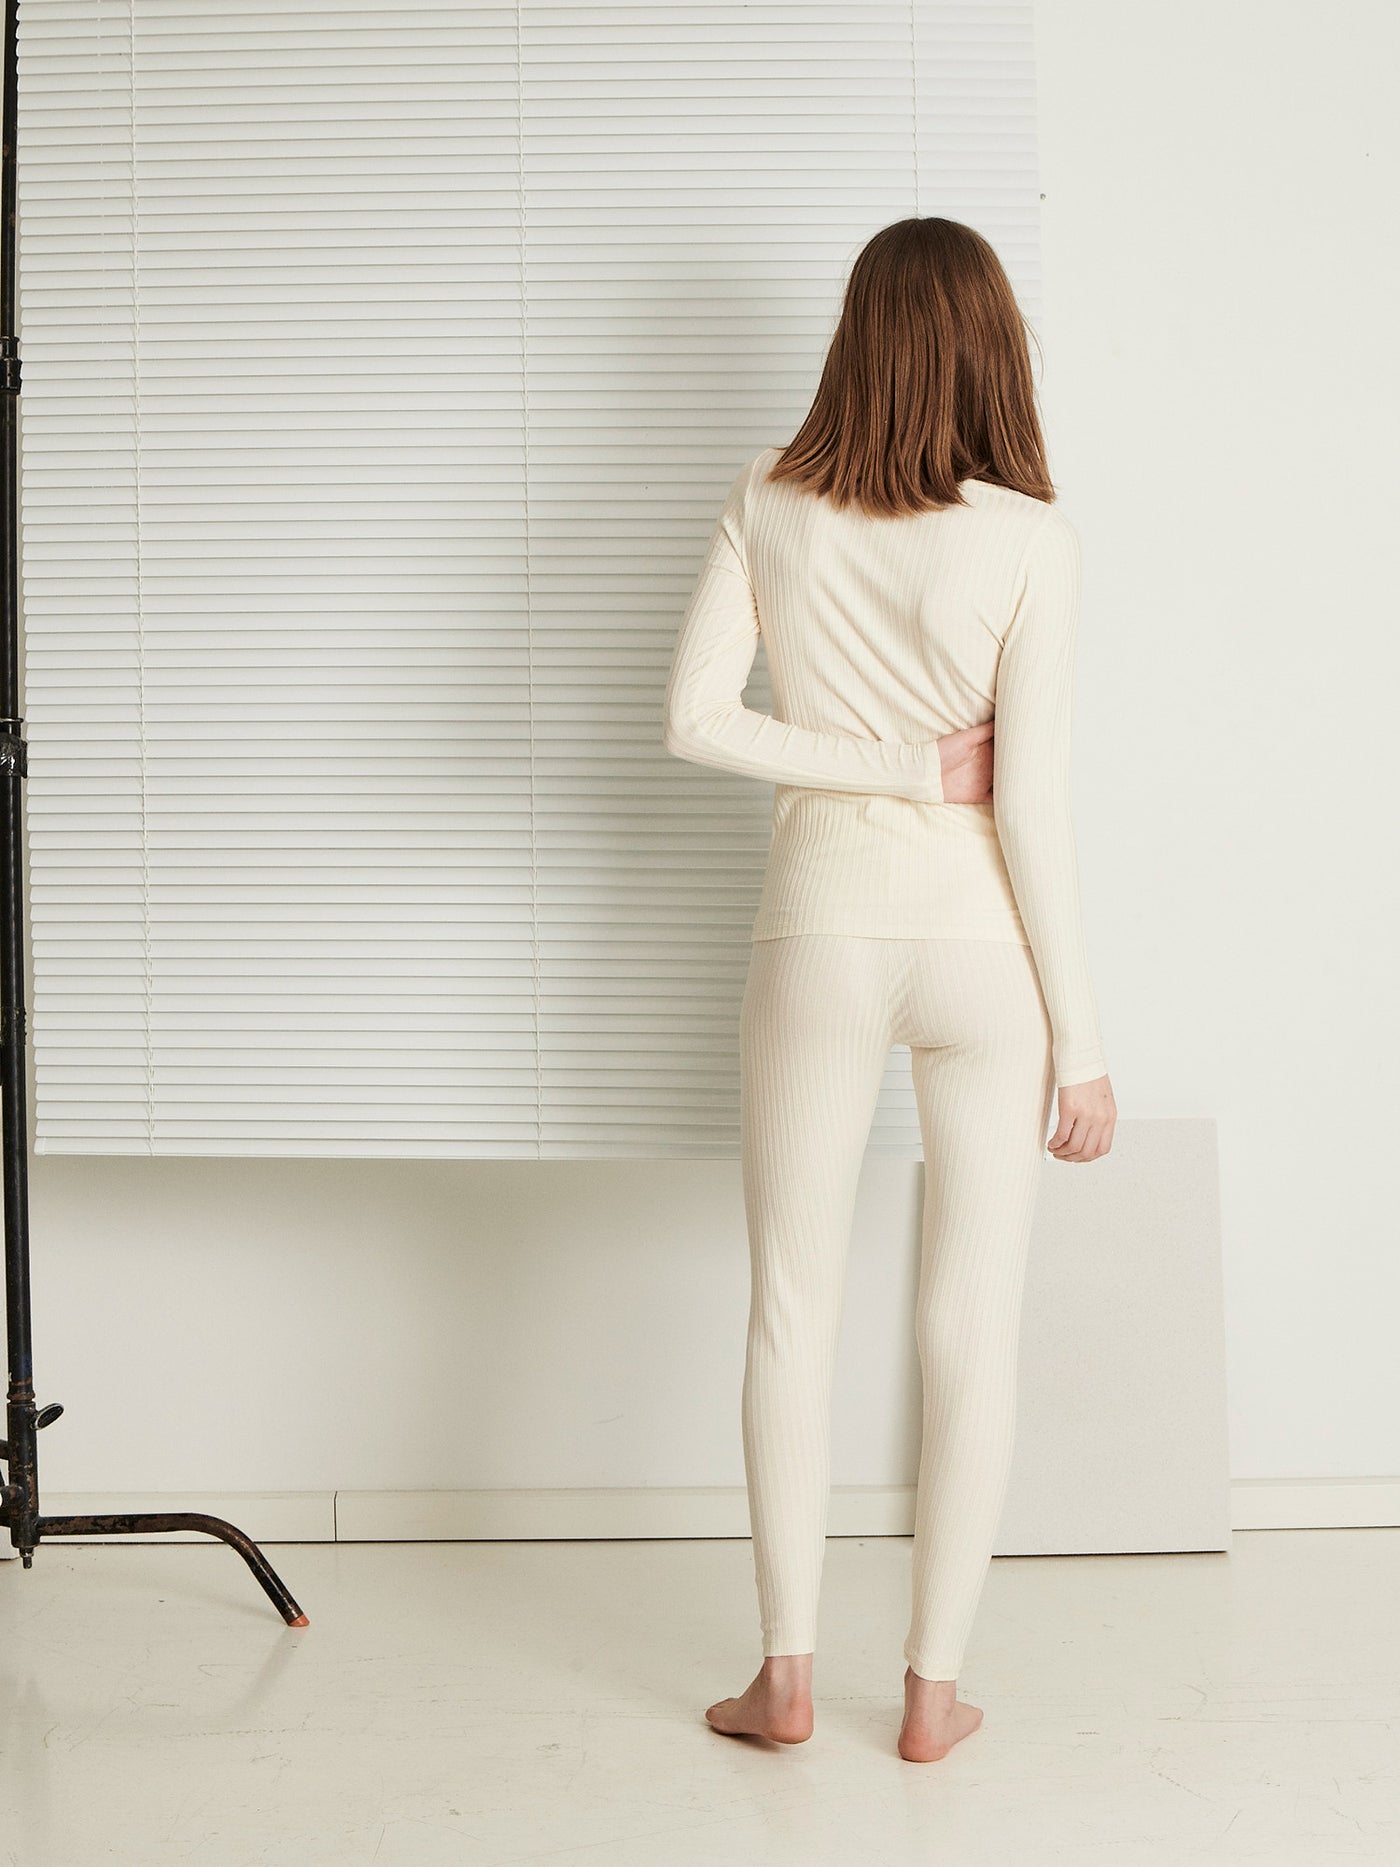 Female wearing our Celine Leggings Creme. Seen from the back.